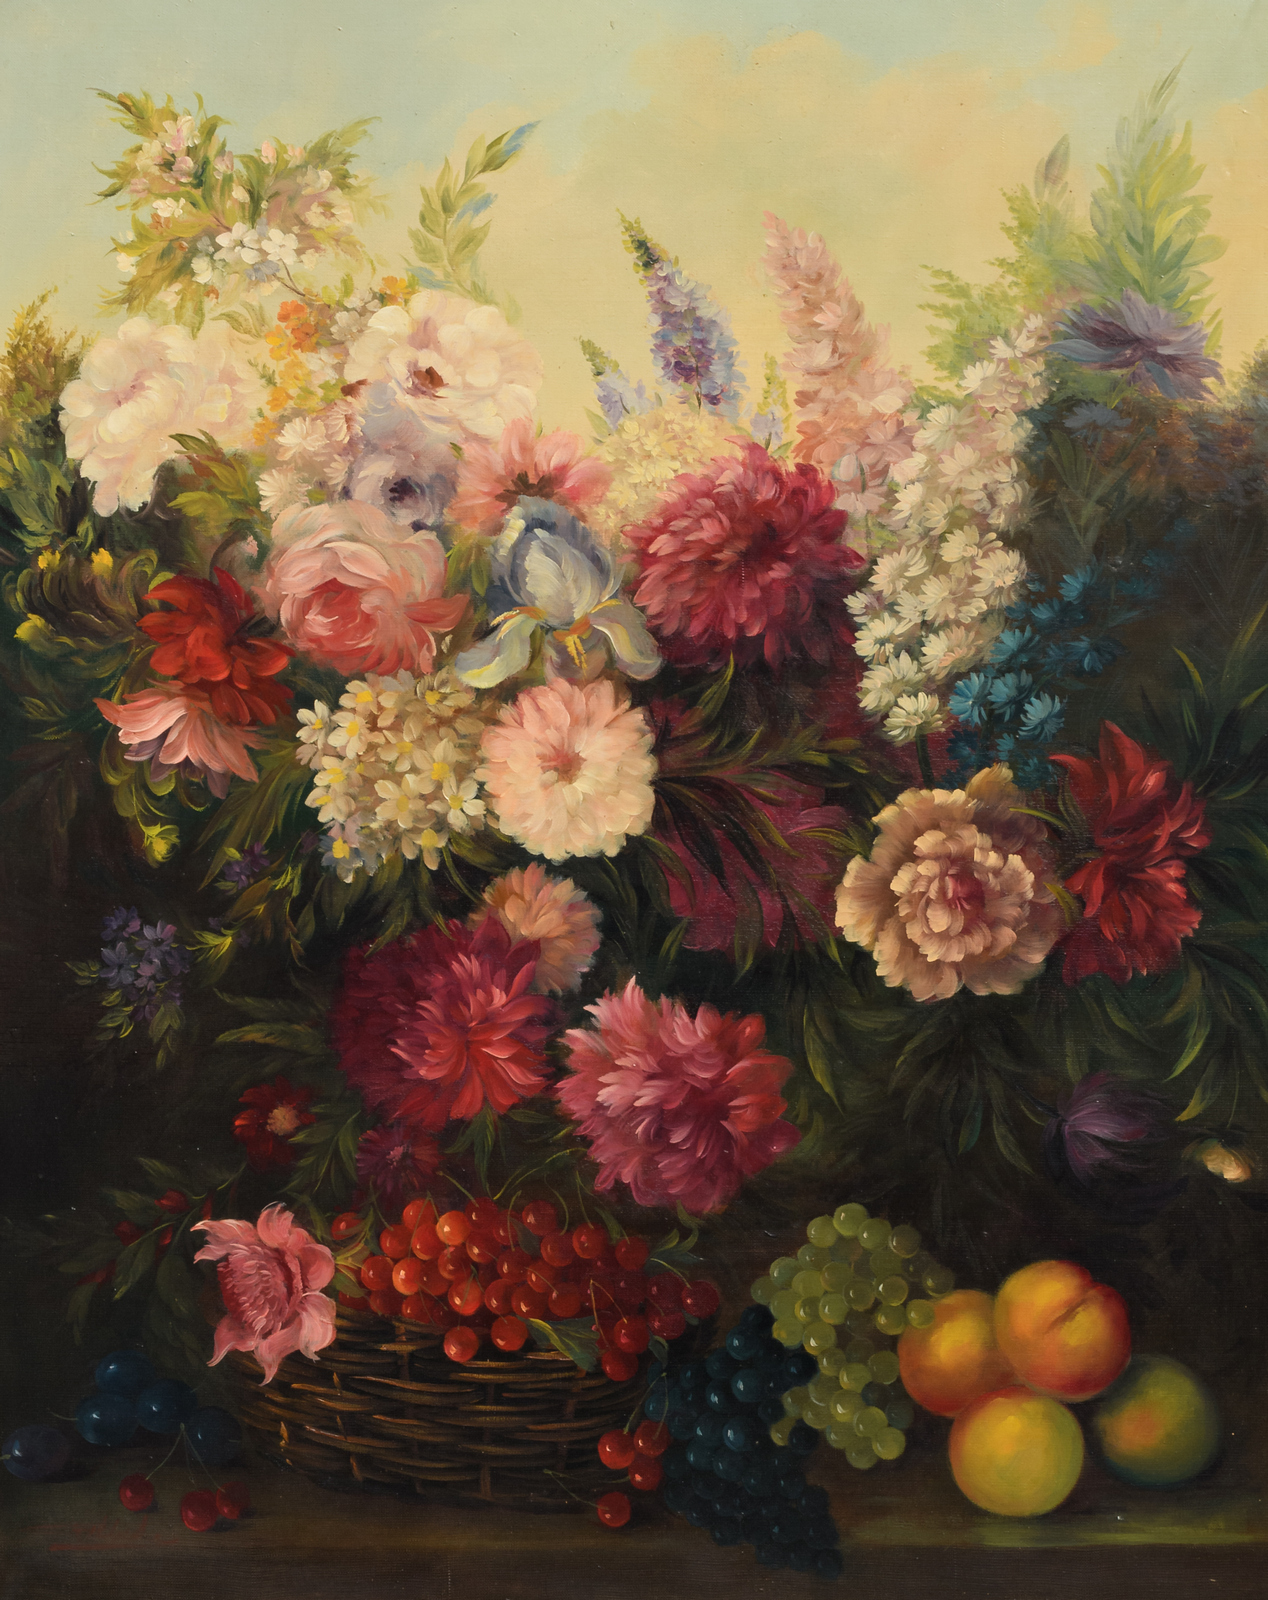 Carlier M., a still life with flowers, oil on canvas, 80 x 100 cm